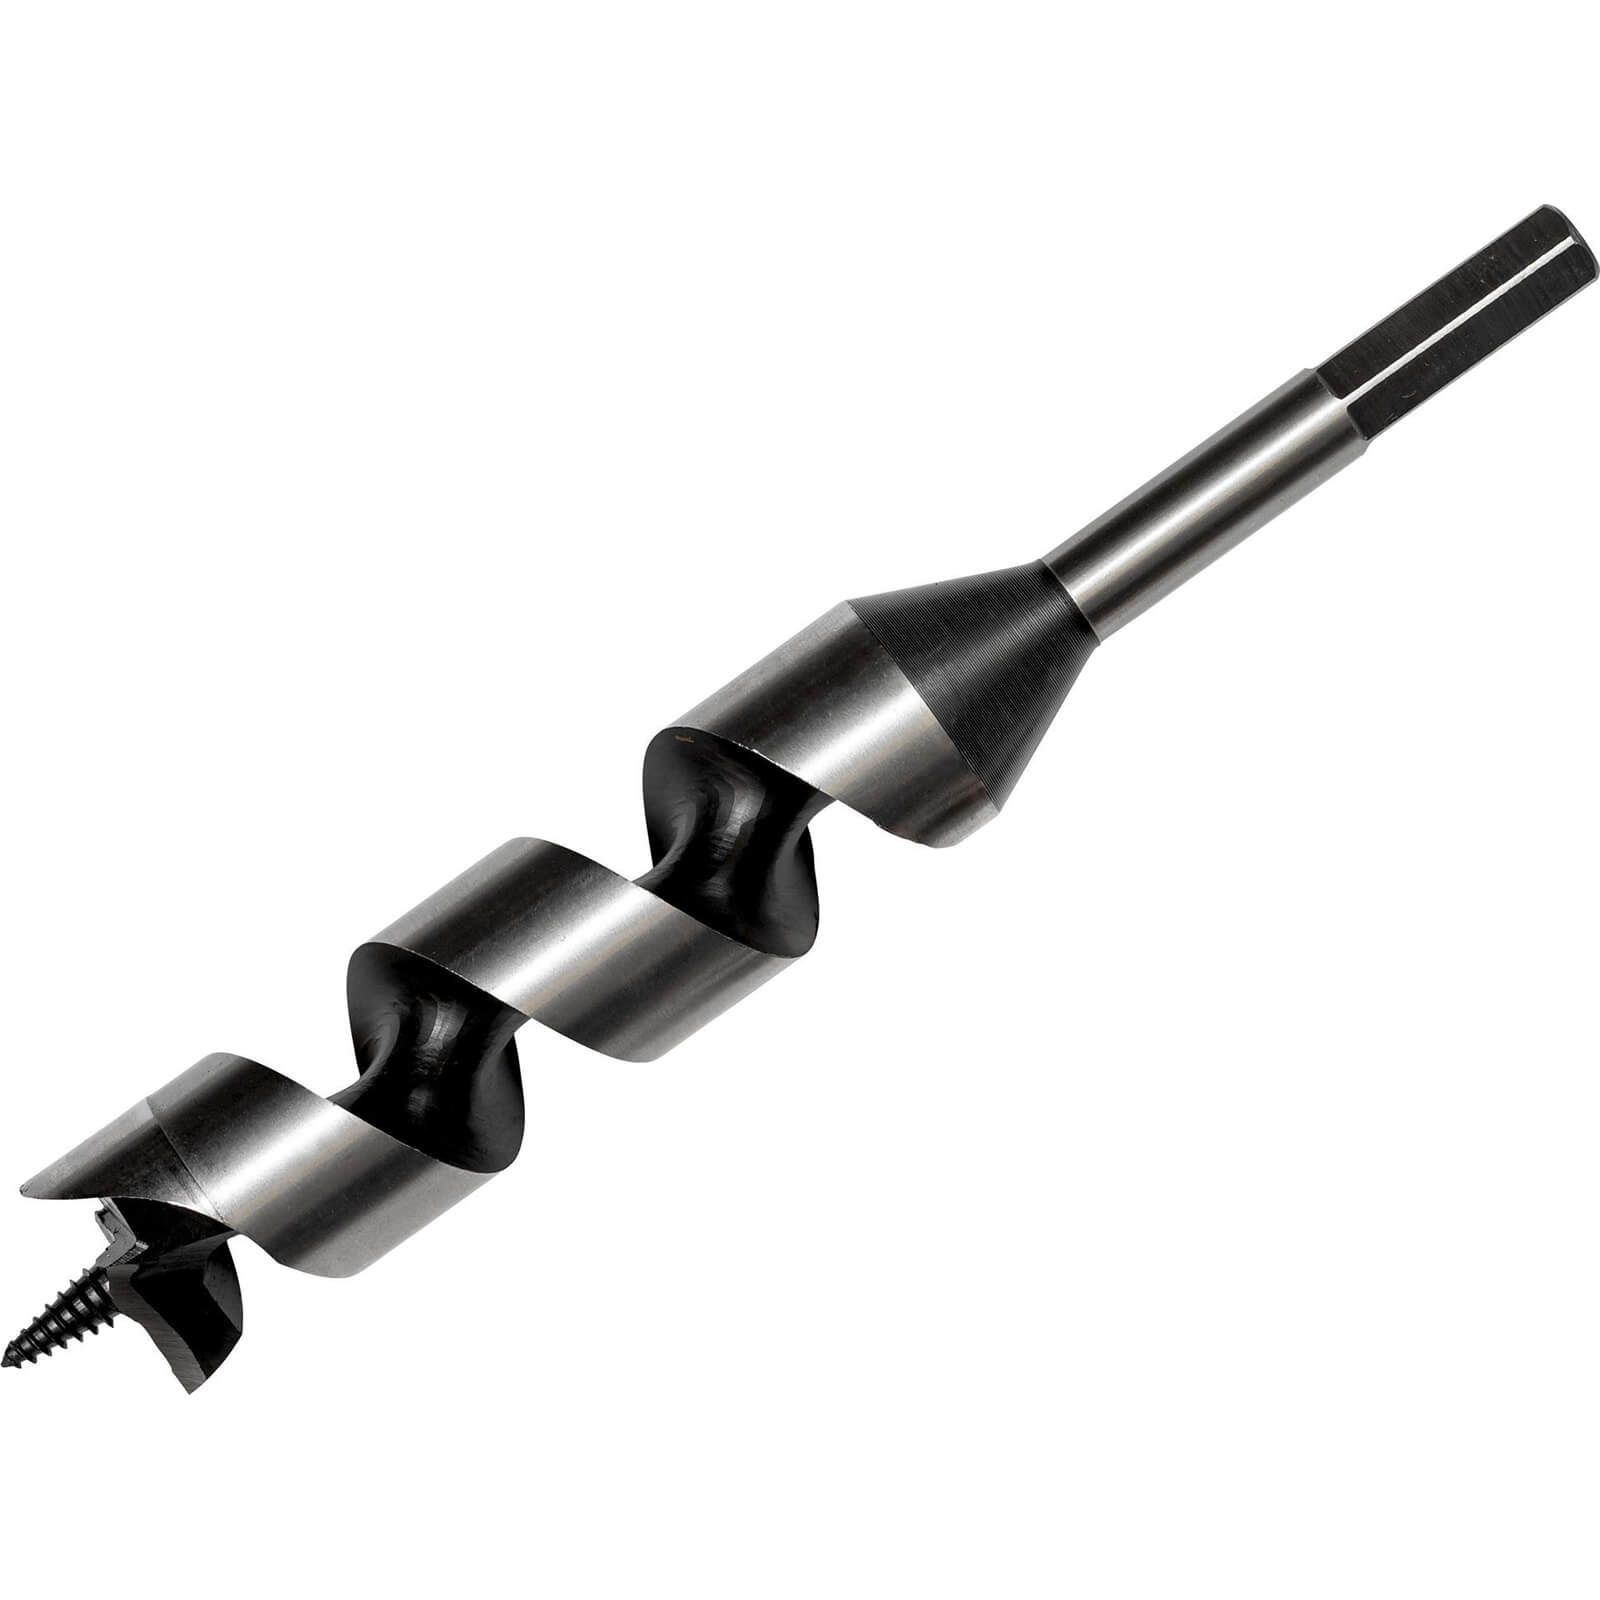 Photo of Bahco 9626 Series Combination Auger Drill Bit 26mm 230mm